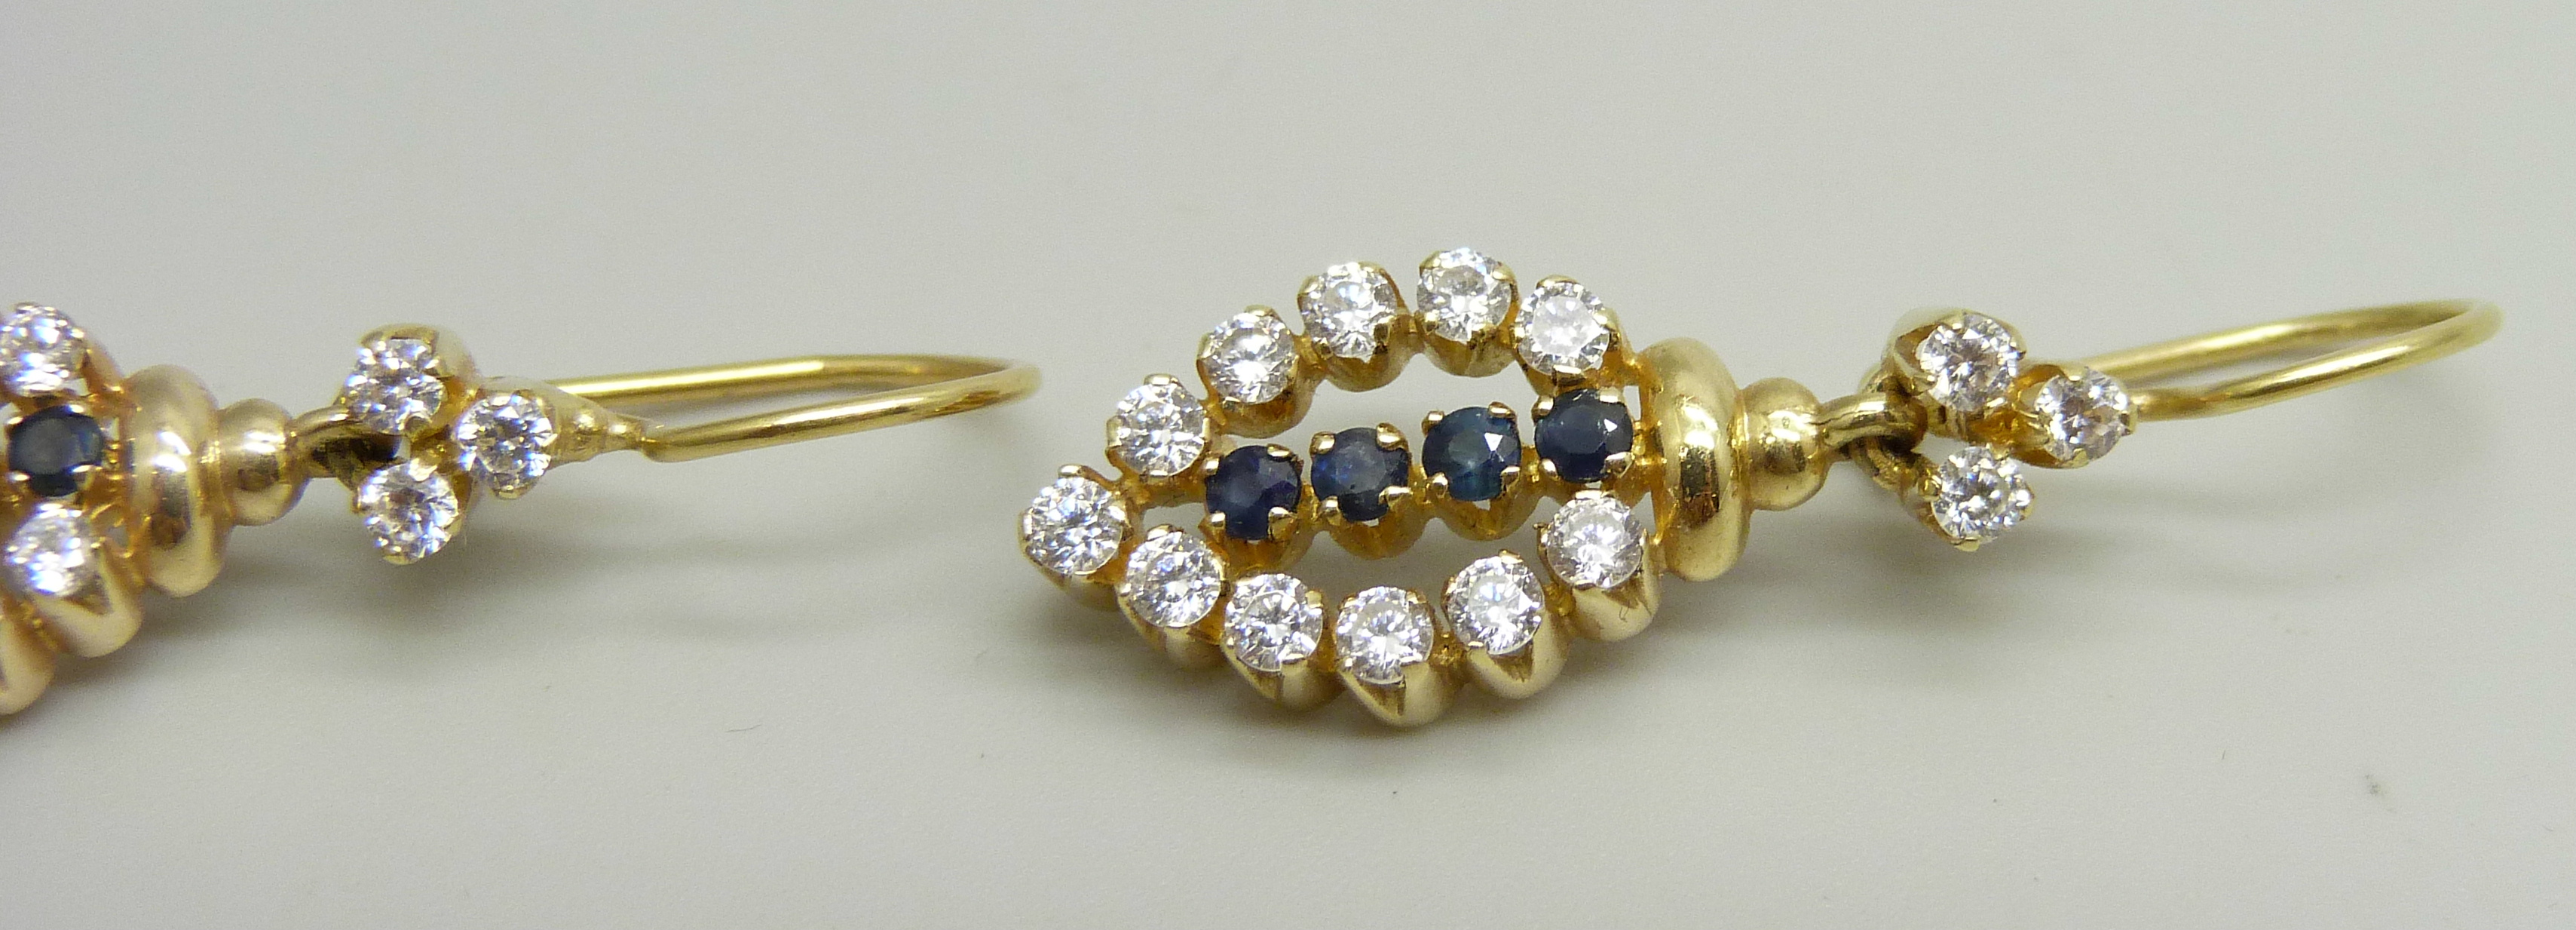 A pair of yellow metal drop earrings set with white and dark blue stones, approximately 3.6cm drop - Image 3 of 4